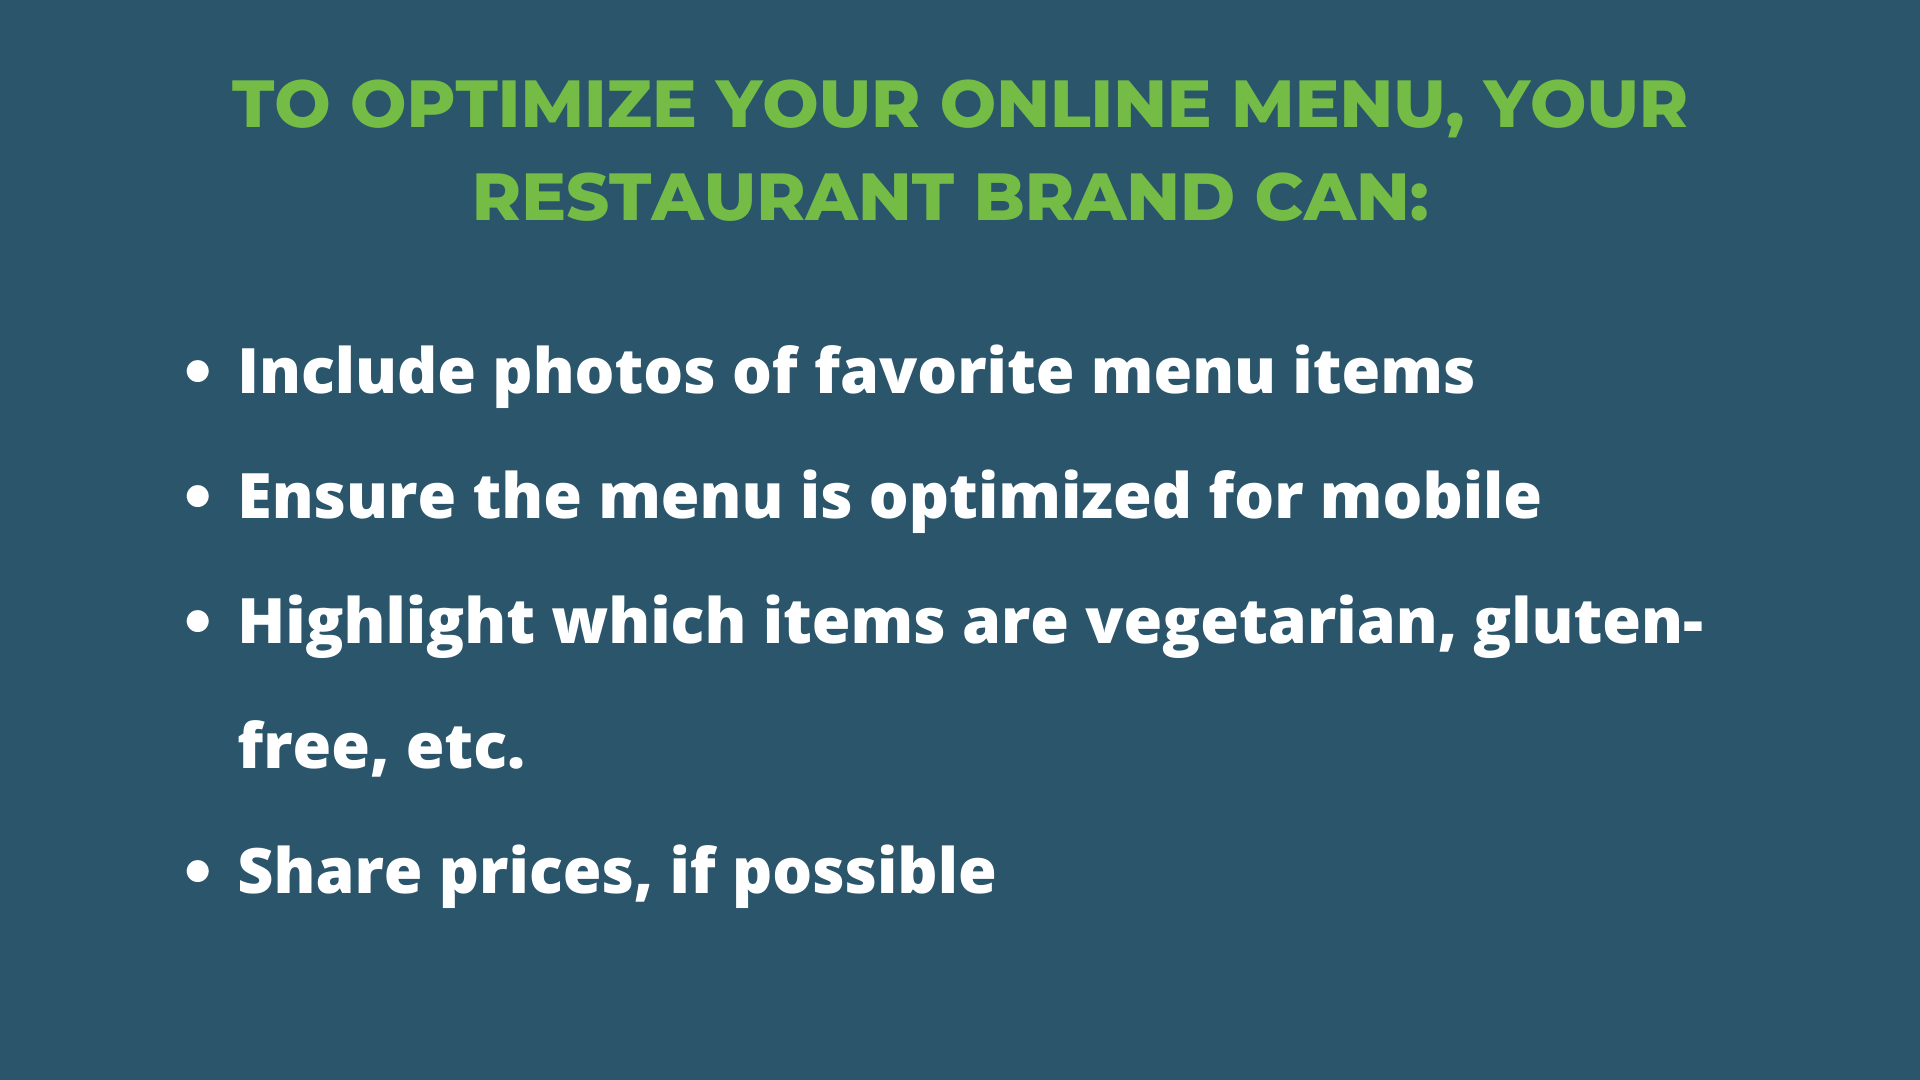 A navy blue box with a green title "To Optimize Your Online Menu, Your Restaurant Brand Can:" with white bulleted text underneath